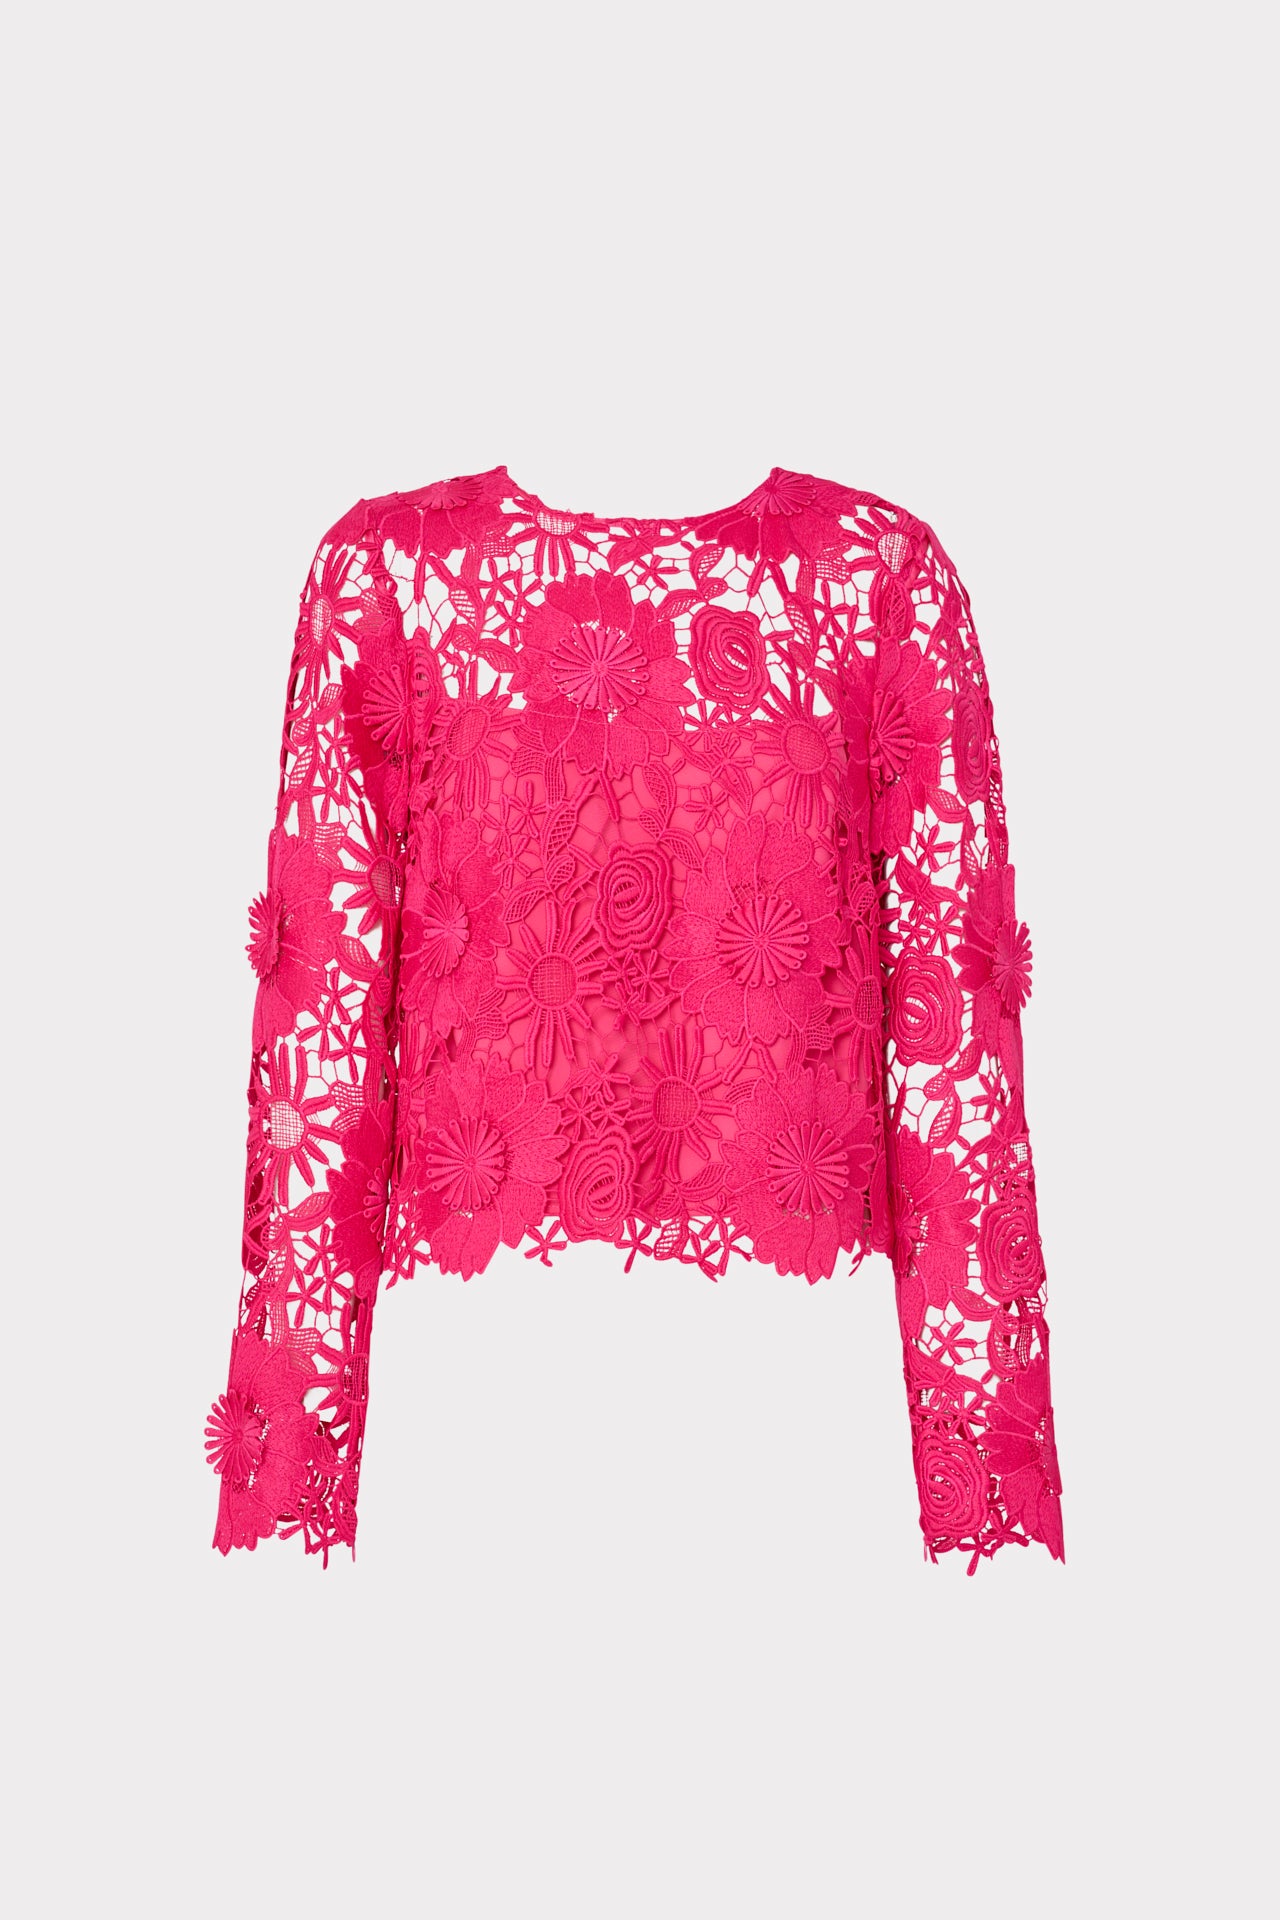 Nori 3D Lace Shirt in Milly Pink | MILLY